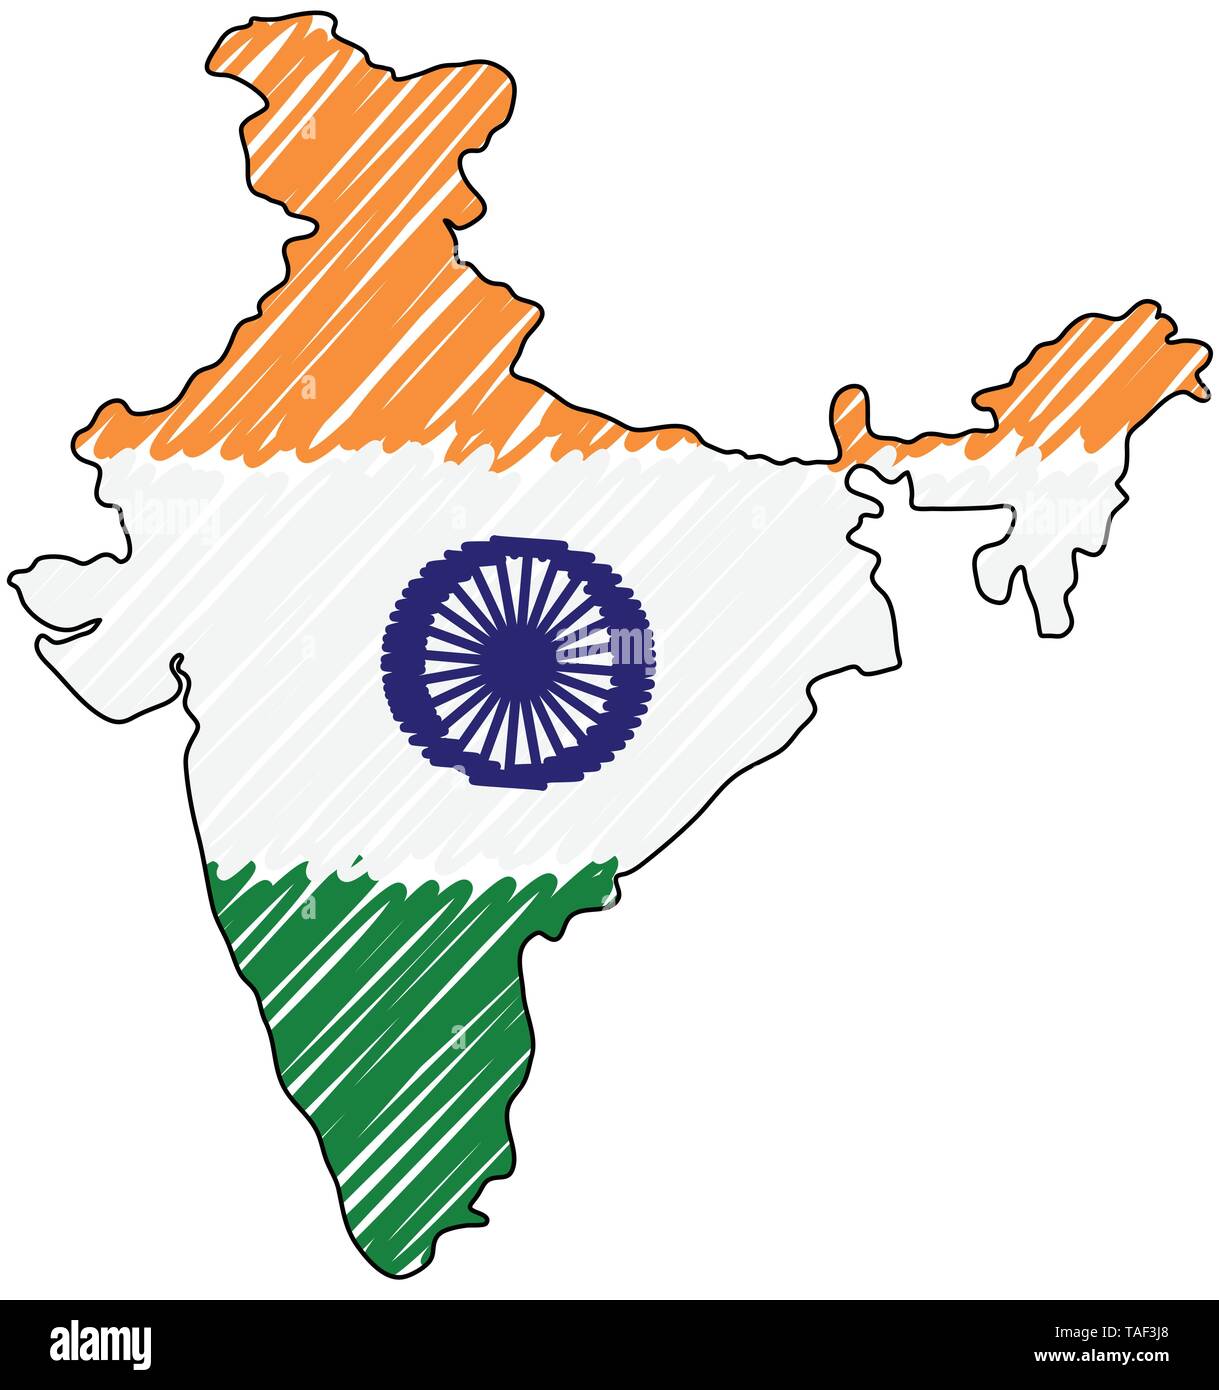 India Map On India Flag Drawing Stock Illustration 114504316 | Shutterstock-saigonsouth.com.vn